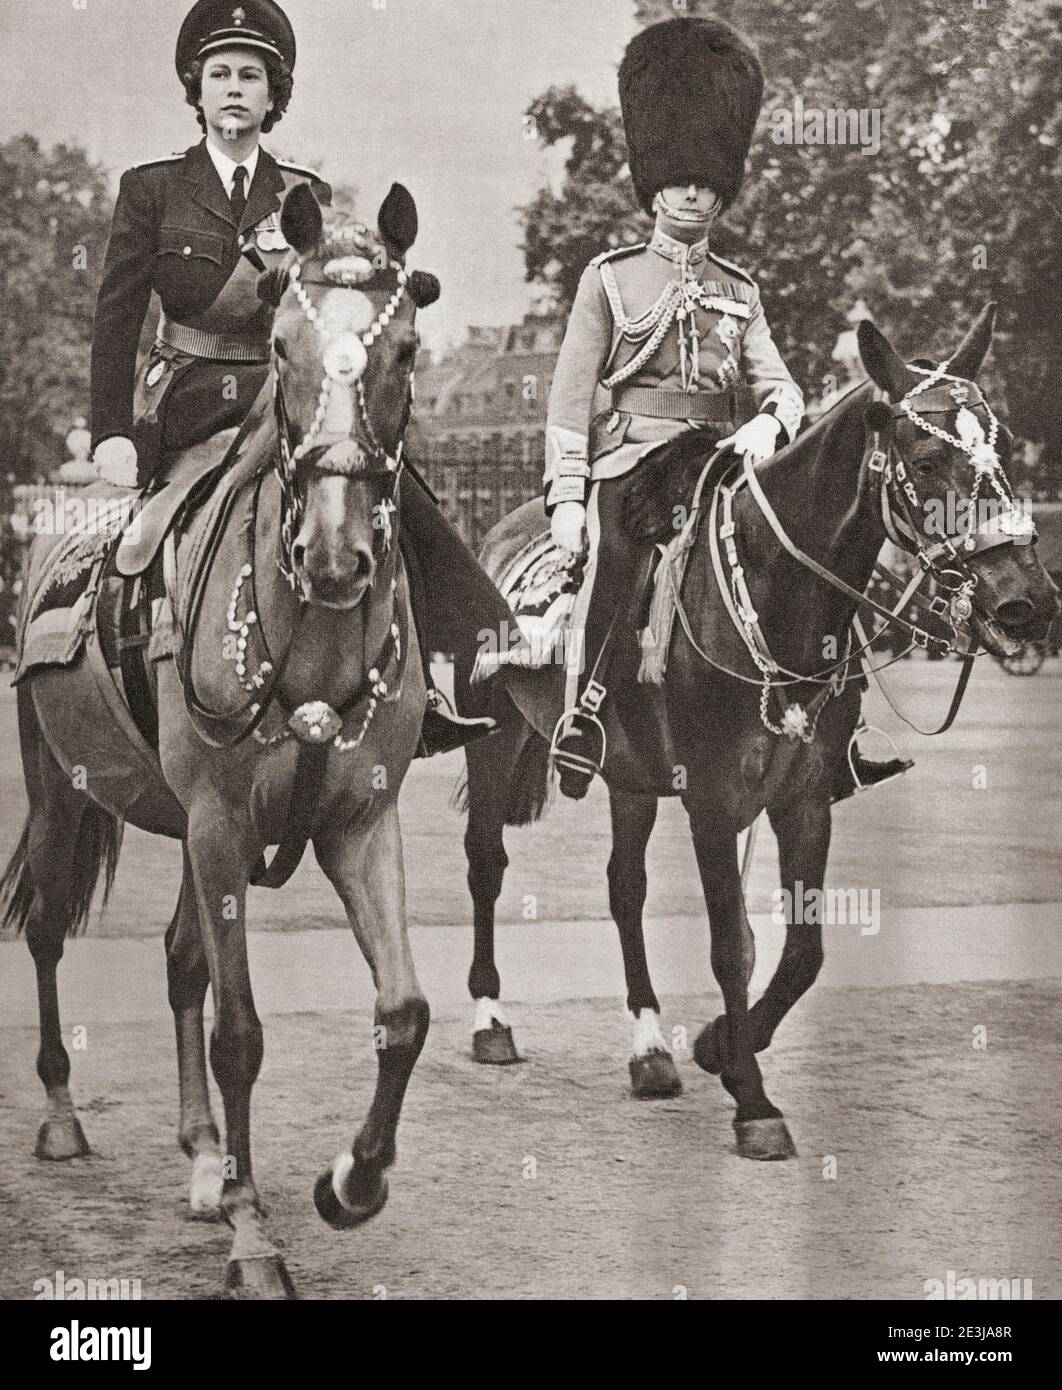 EDITORIAL ONLY Princess Elizabeth of York and the Duke of Gloucester at the ceremony of Trooping the Colour, 1949.  Princess Elizabeth of York, born 1926, future Elizabeth II, Queen of the United Kingdom.  Prince Henry, Duke of Gloucester, 1900 – 1974. Uncle to Princess Elizabeth. From The Queen Elizabeth Coronation Book, published 1953. Stock Photo